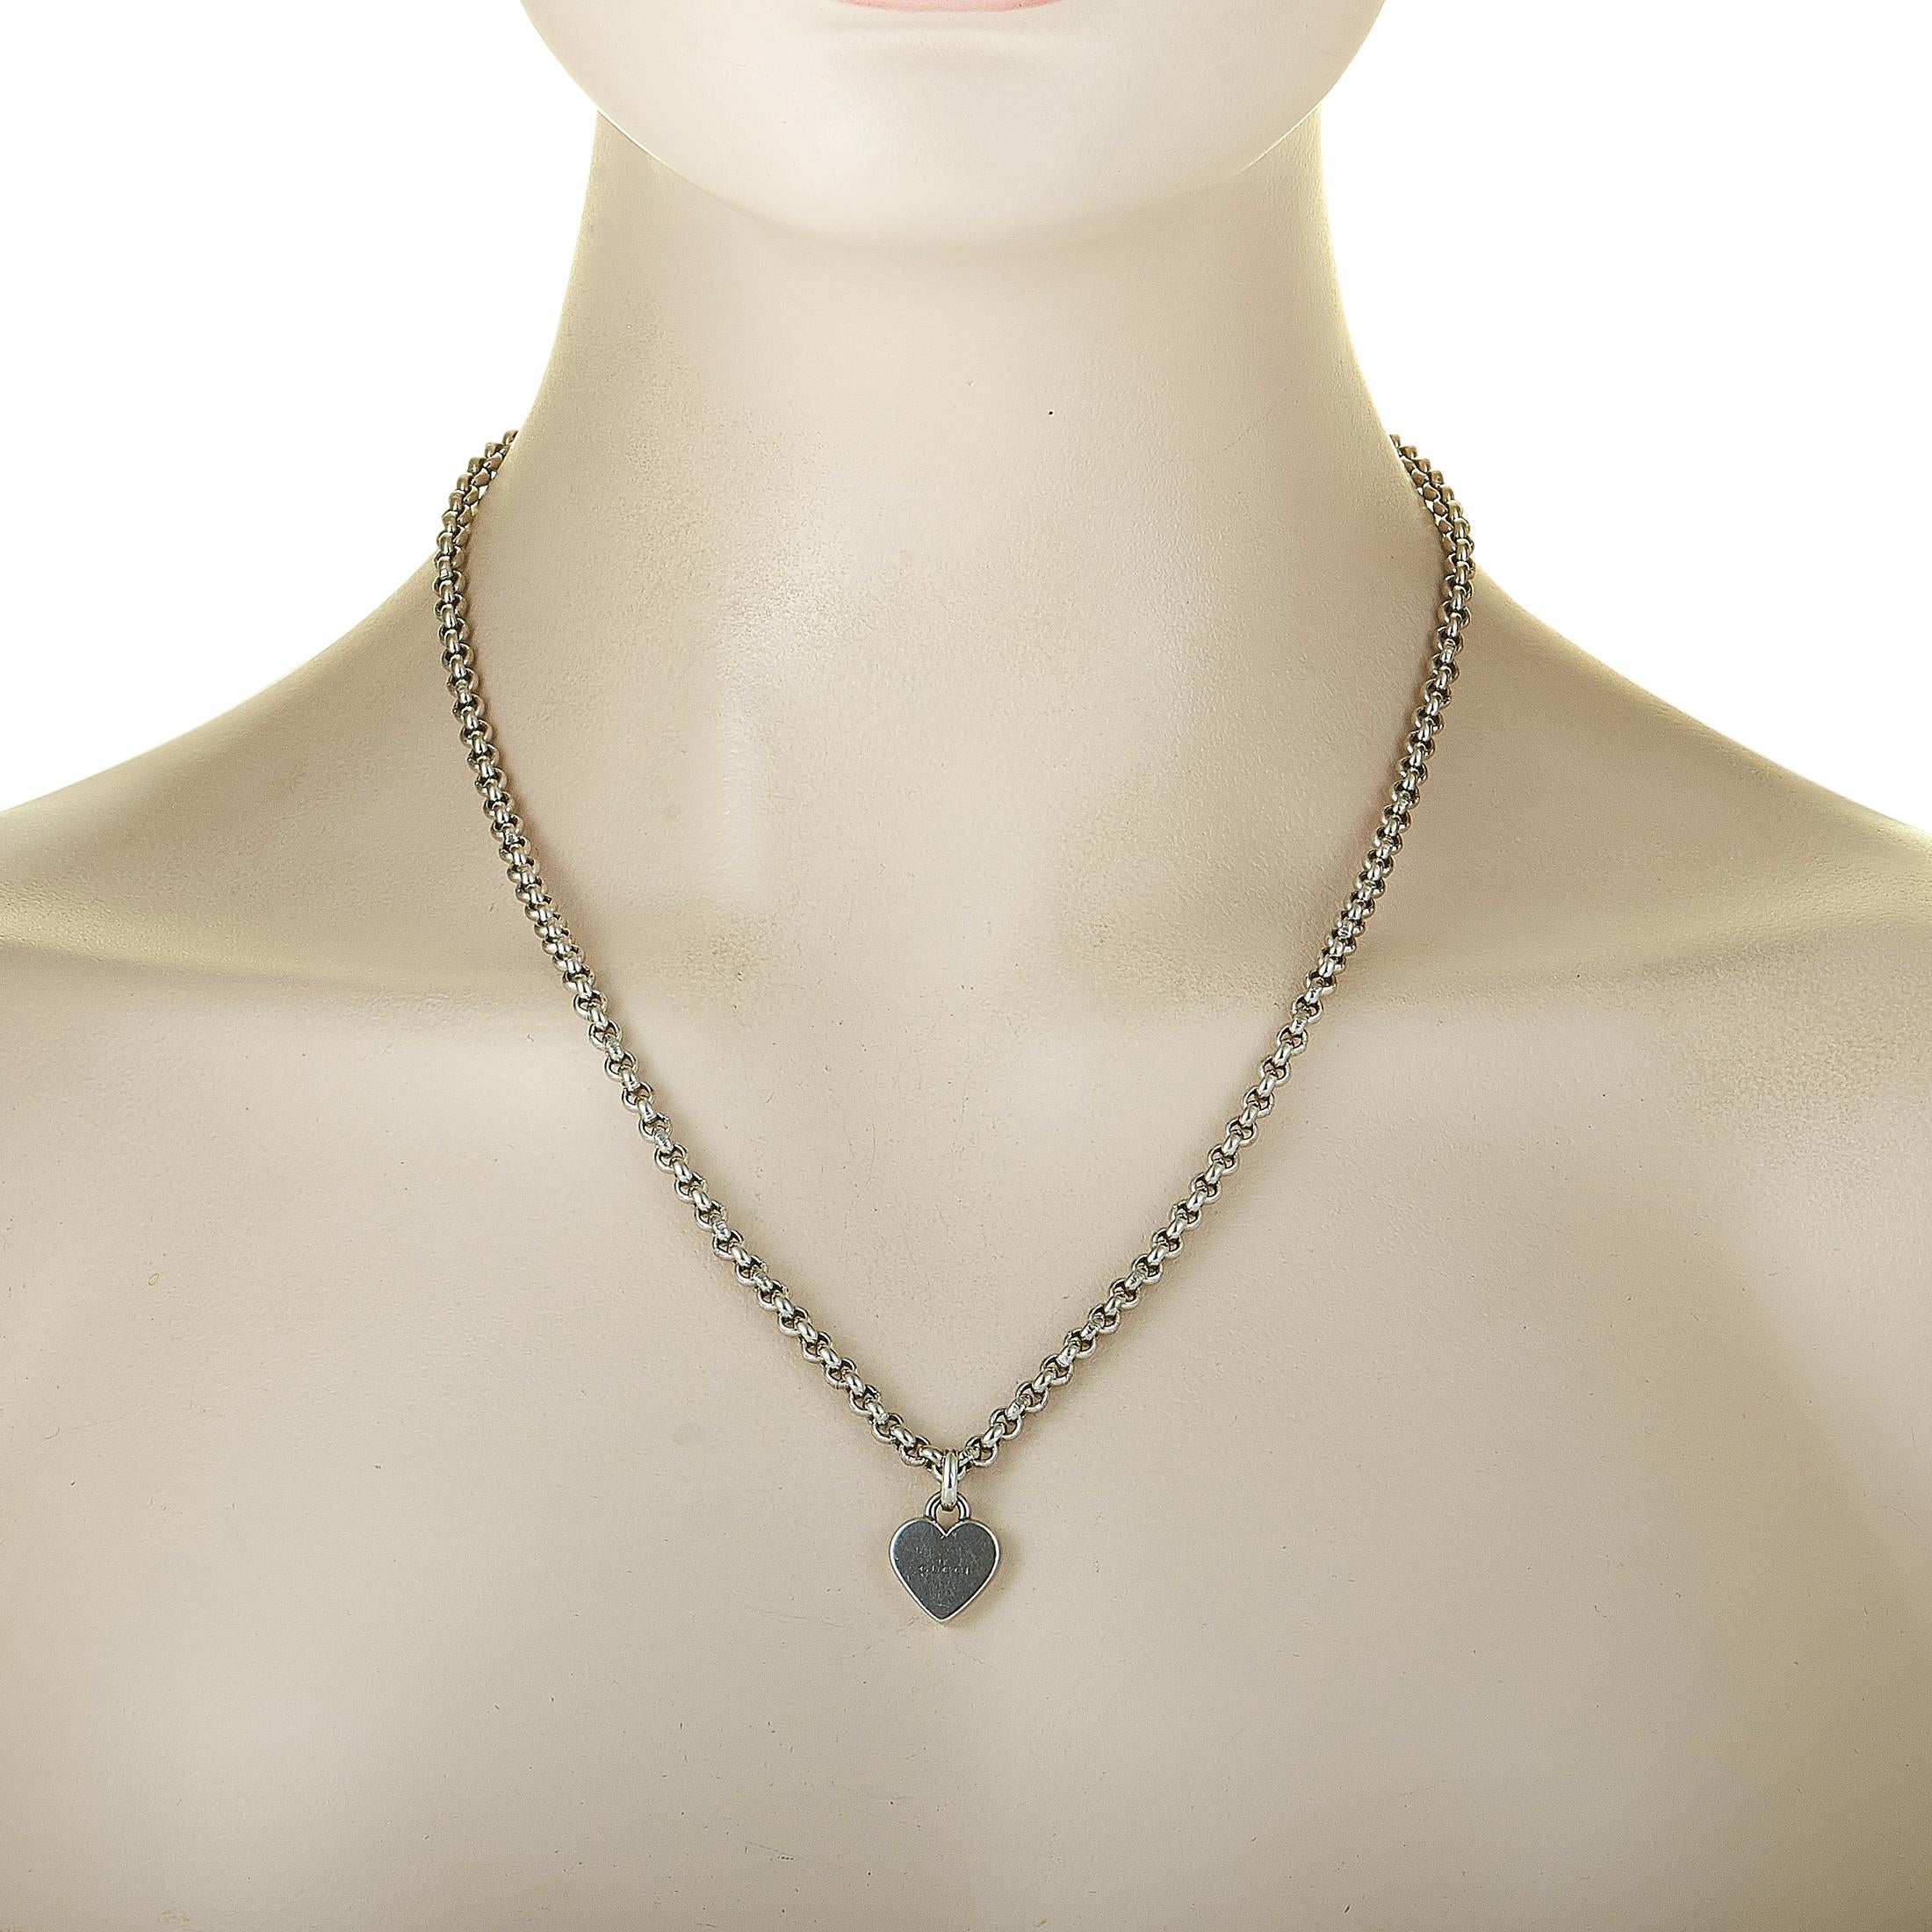 The Gucci “Trademark” necklace is crafted from silver and weighs 40 grams. The necklace boasts a 20” chain and a heart pendant that measures 0.70” in length and 0.50” in width.
 
 This item is offered in brand new condition and includes the